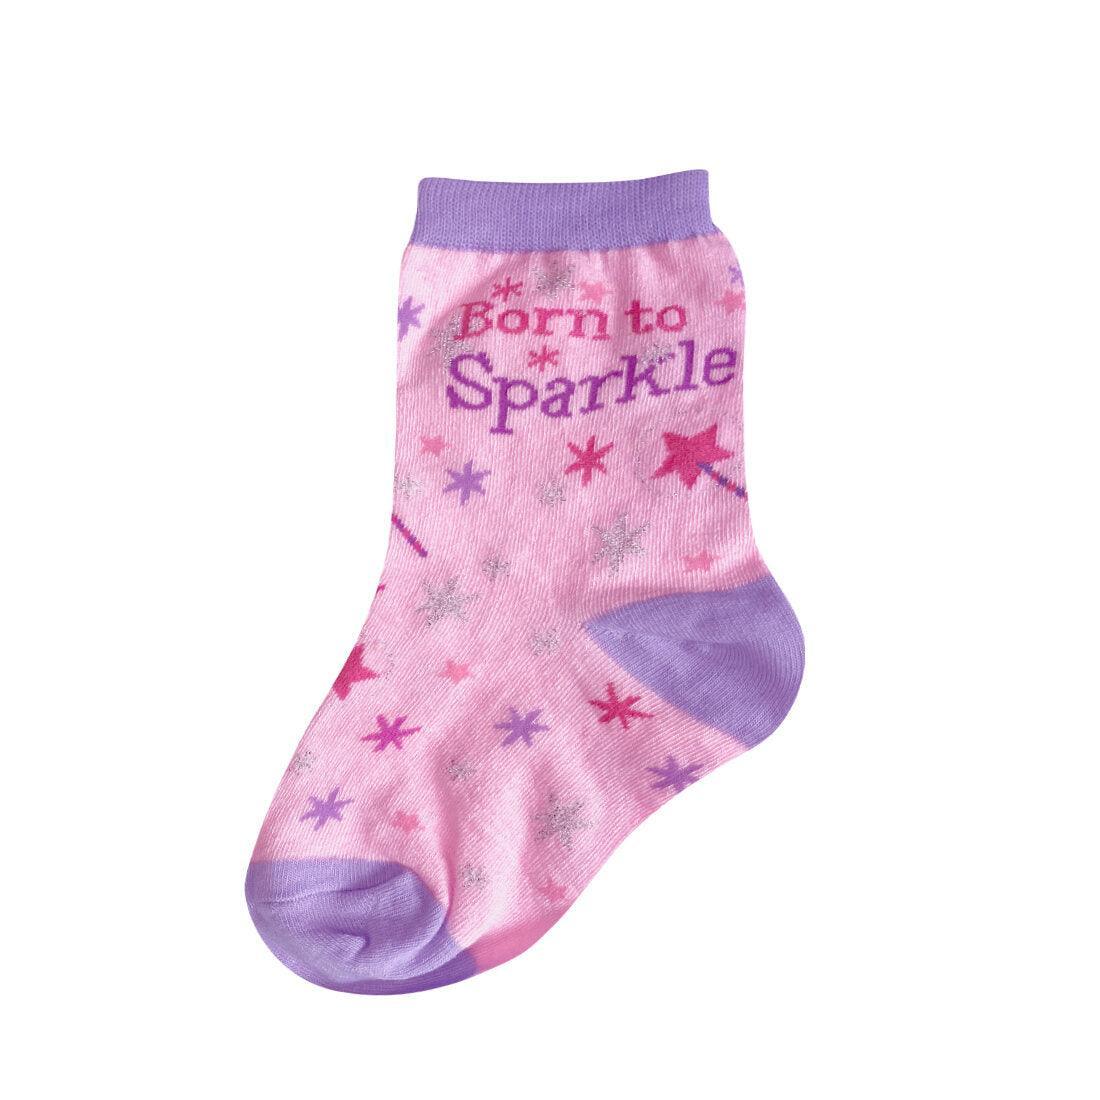 BORN TO SPARKLE, Kids Crew - Foot Traffic - The Sock Monster